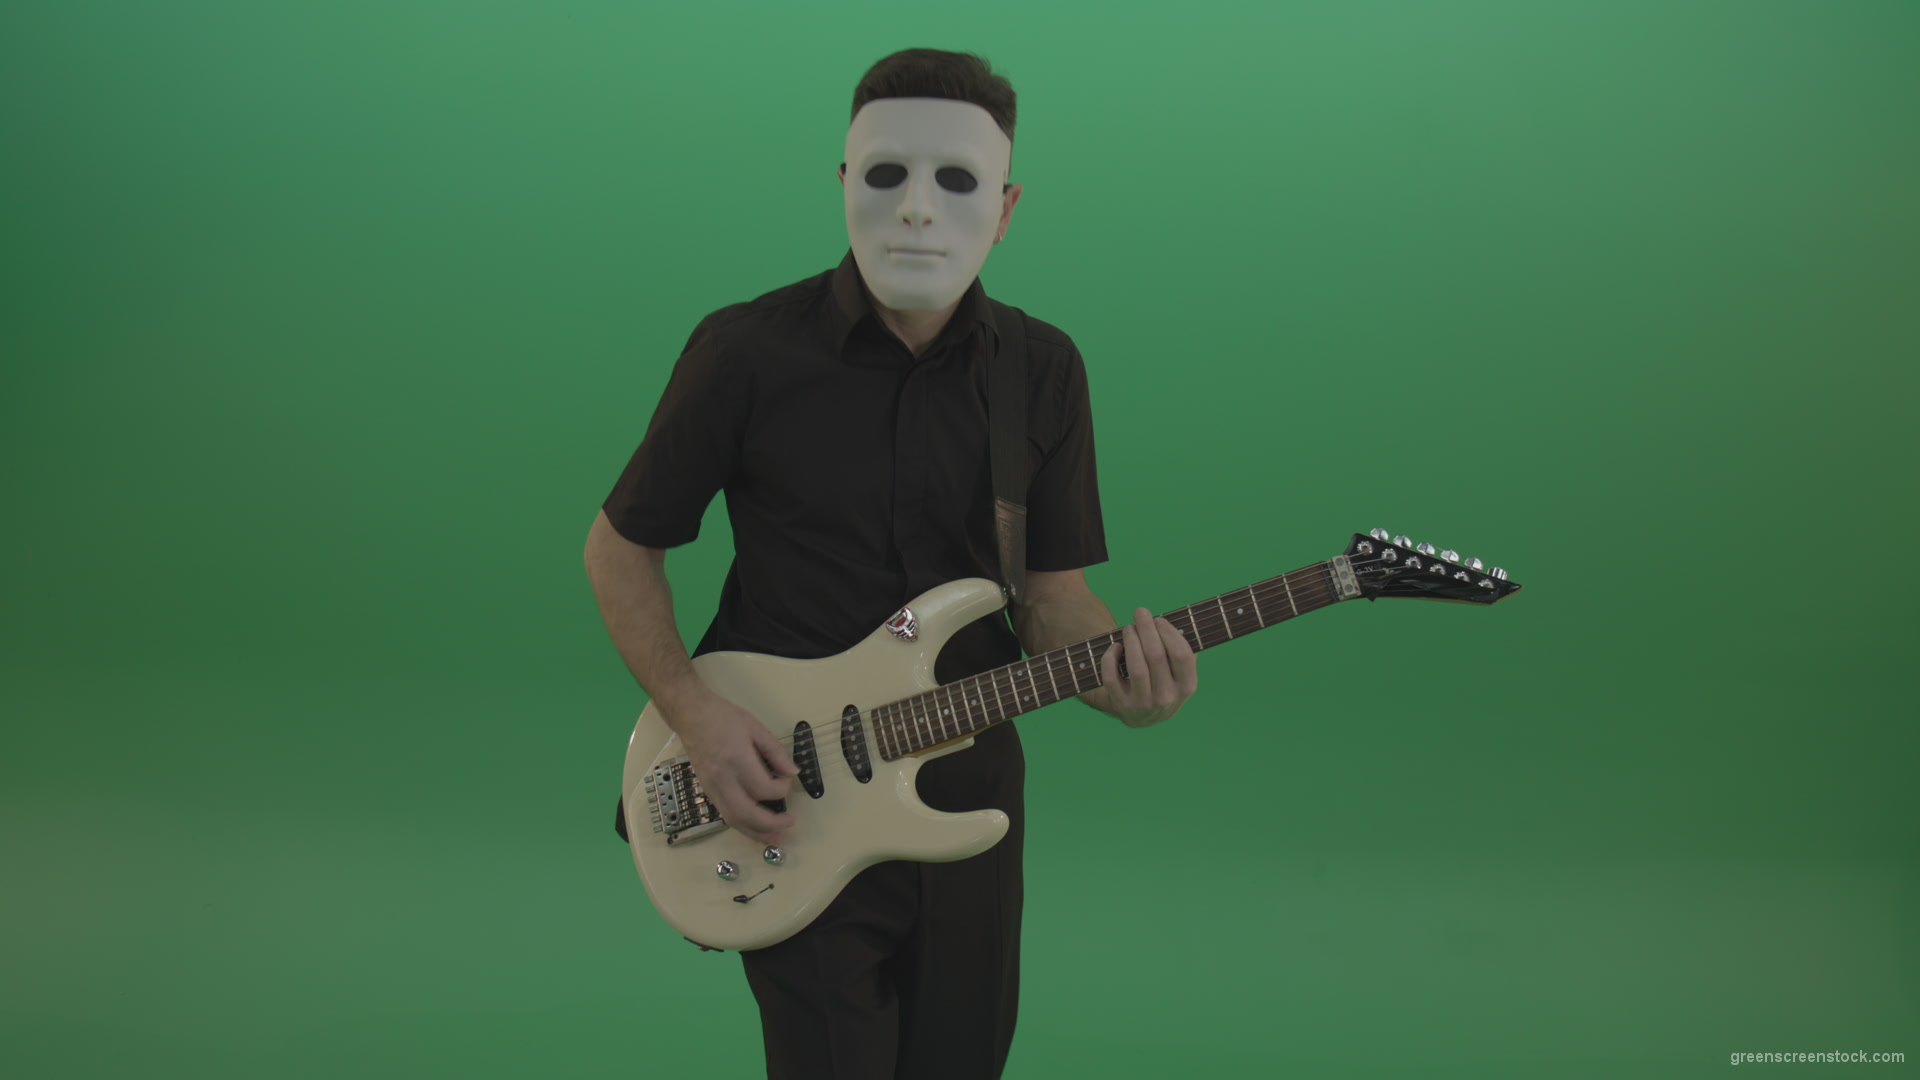 Rock-man-in-white-mask-and-black-wear-playing-guitar-isolated-on-green-screen-in-front-view_006 Green Screen Stock